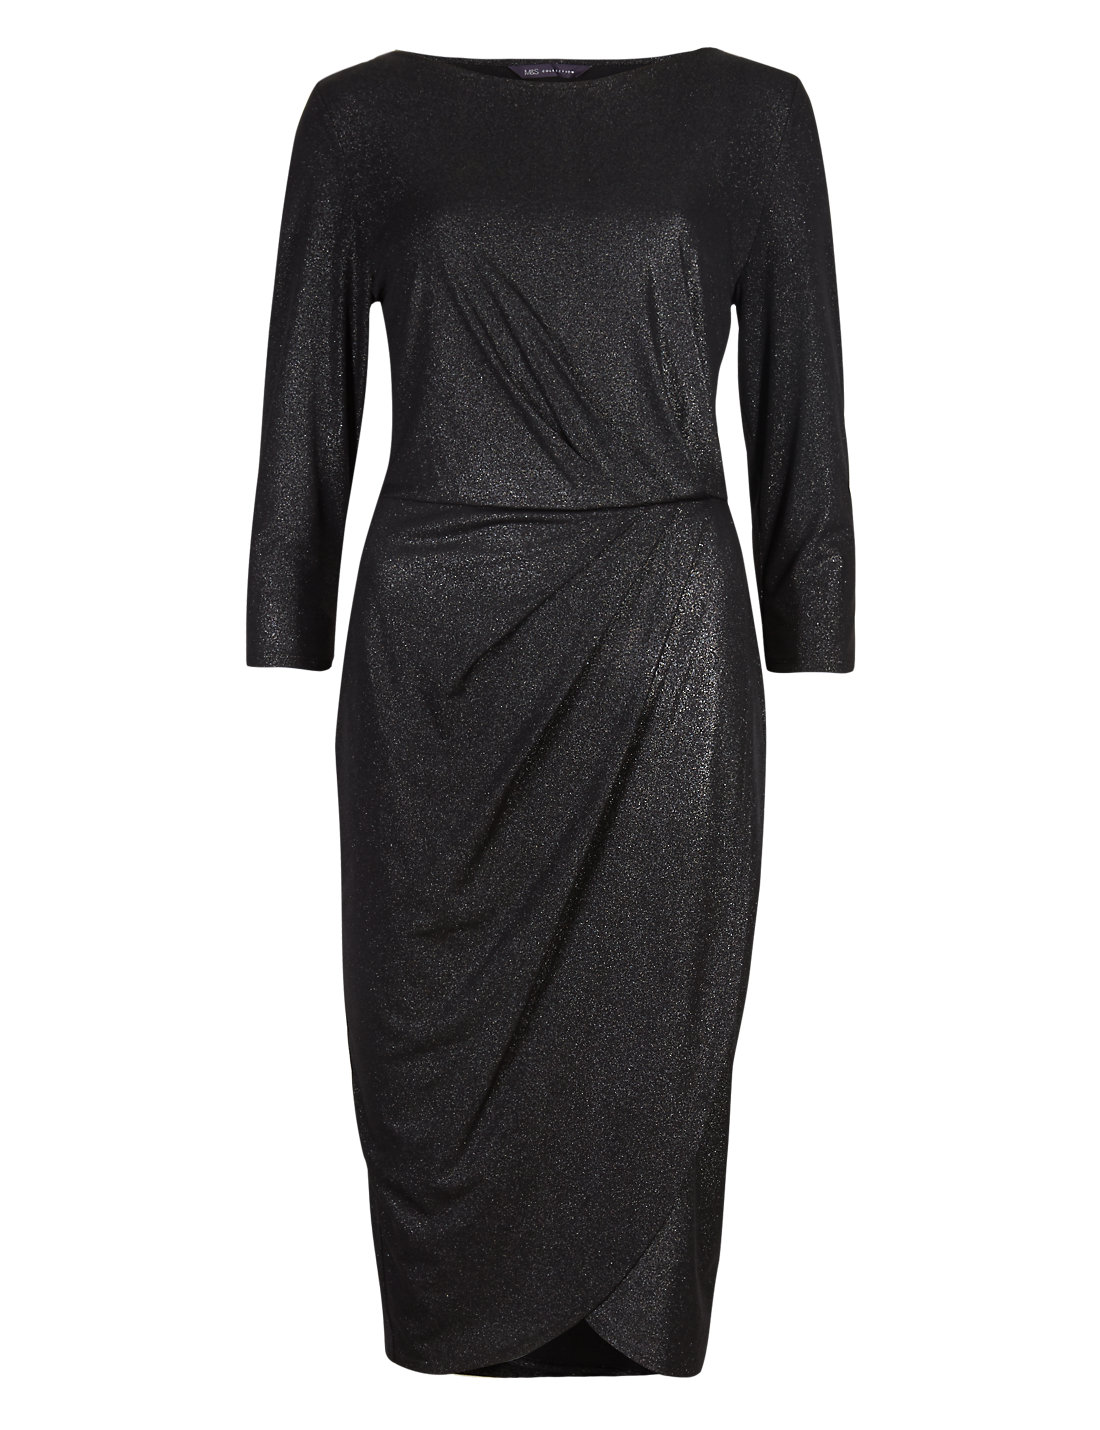 Christmas party dresses for women over 40